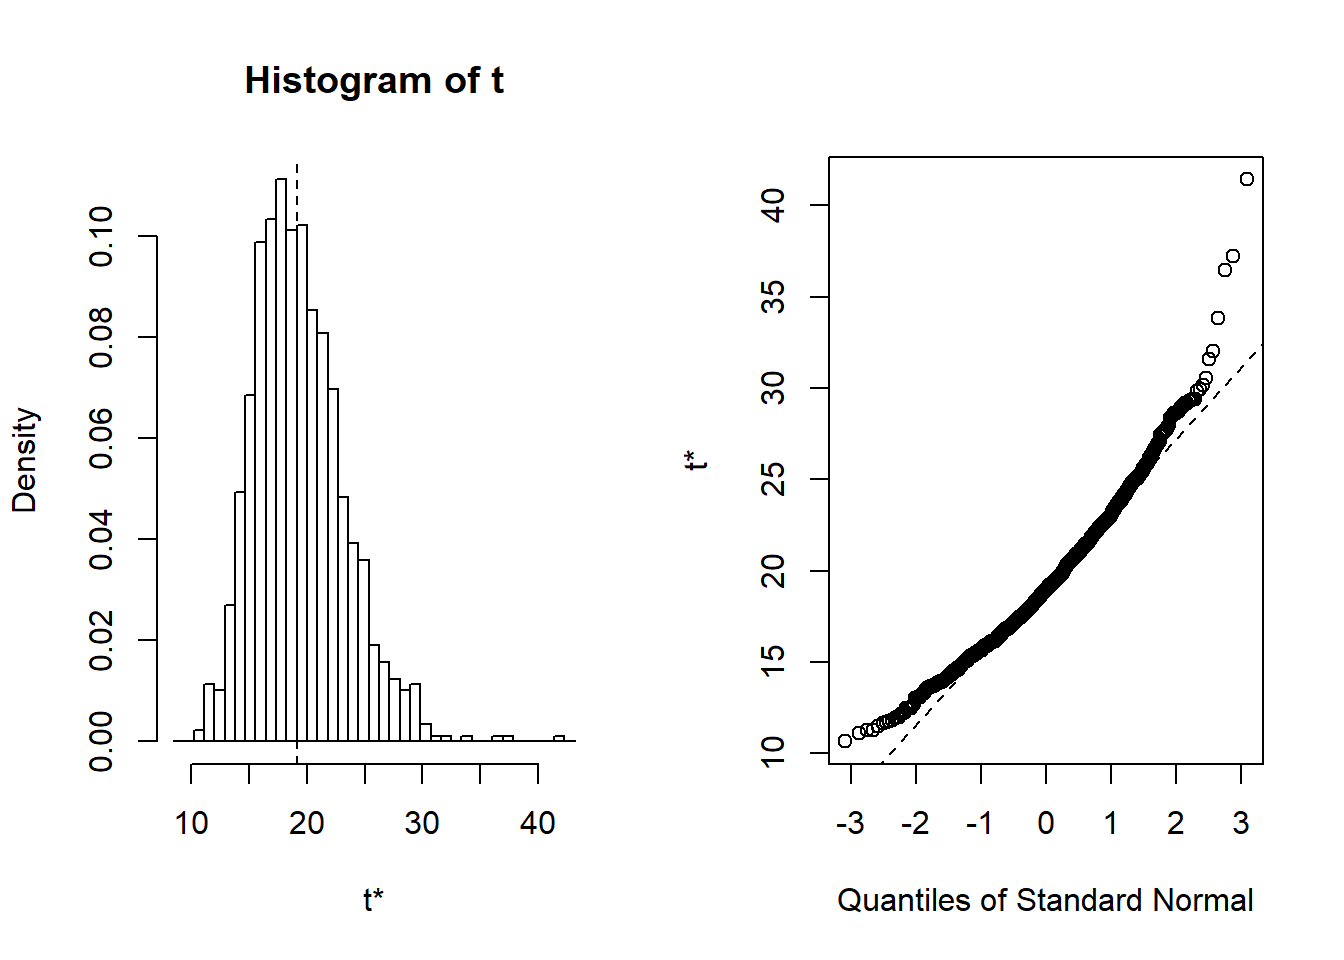 Distribution of Bootstrap Replicates. The left-hand panel is a histogram of replicates. The right-hand panel is a quantile-quantile plot, comparing the bootstrap distribution to the standard normal distribution.